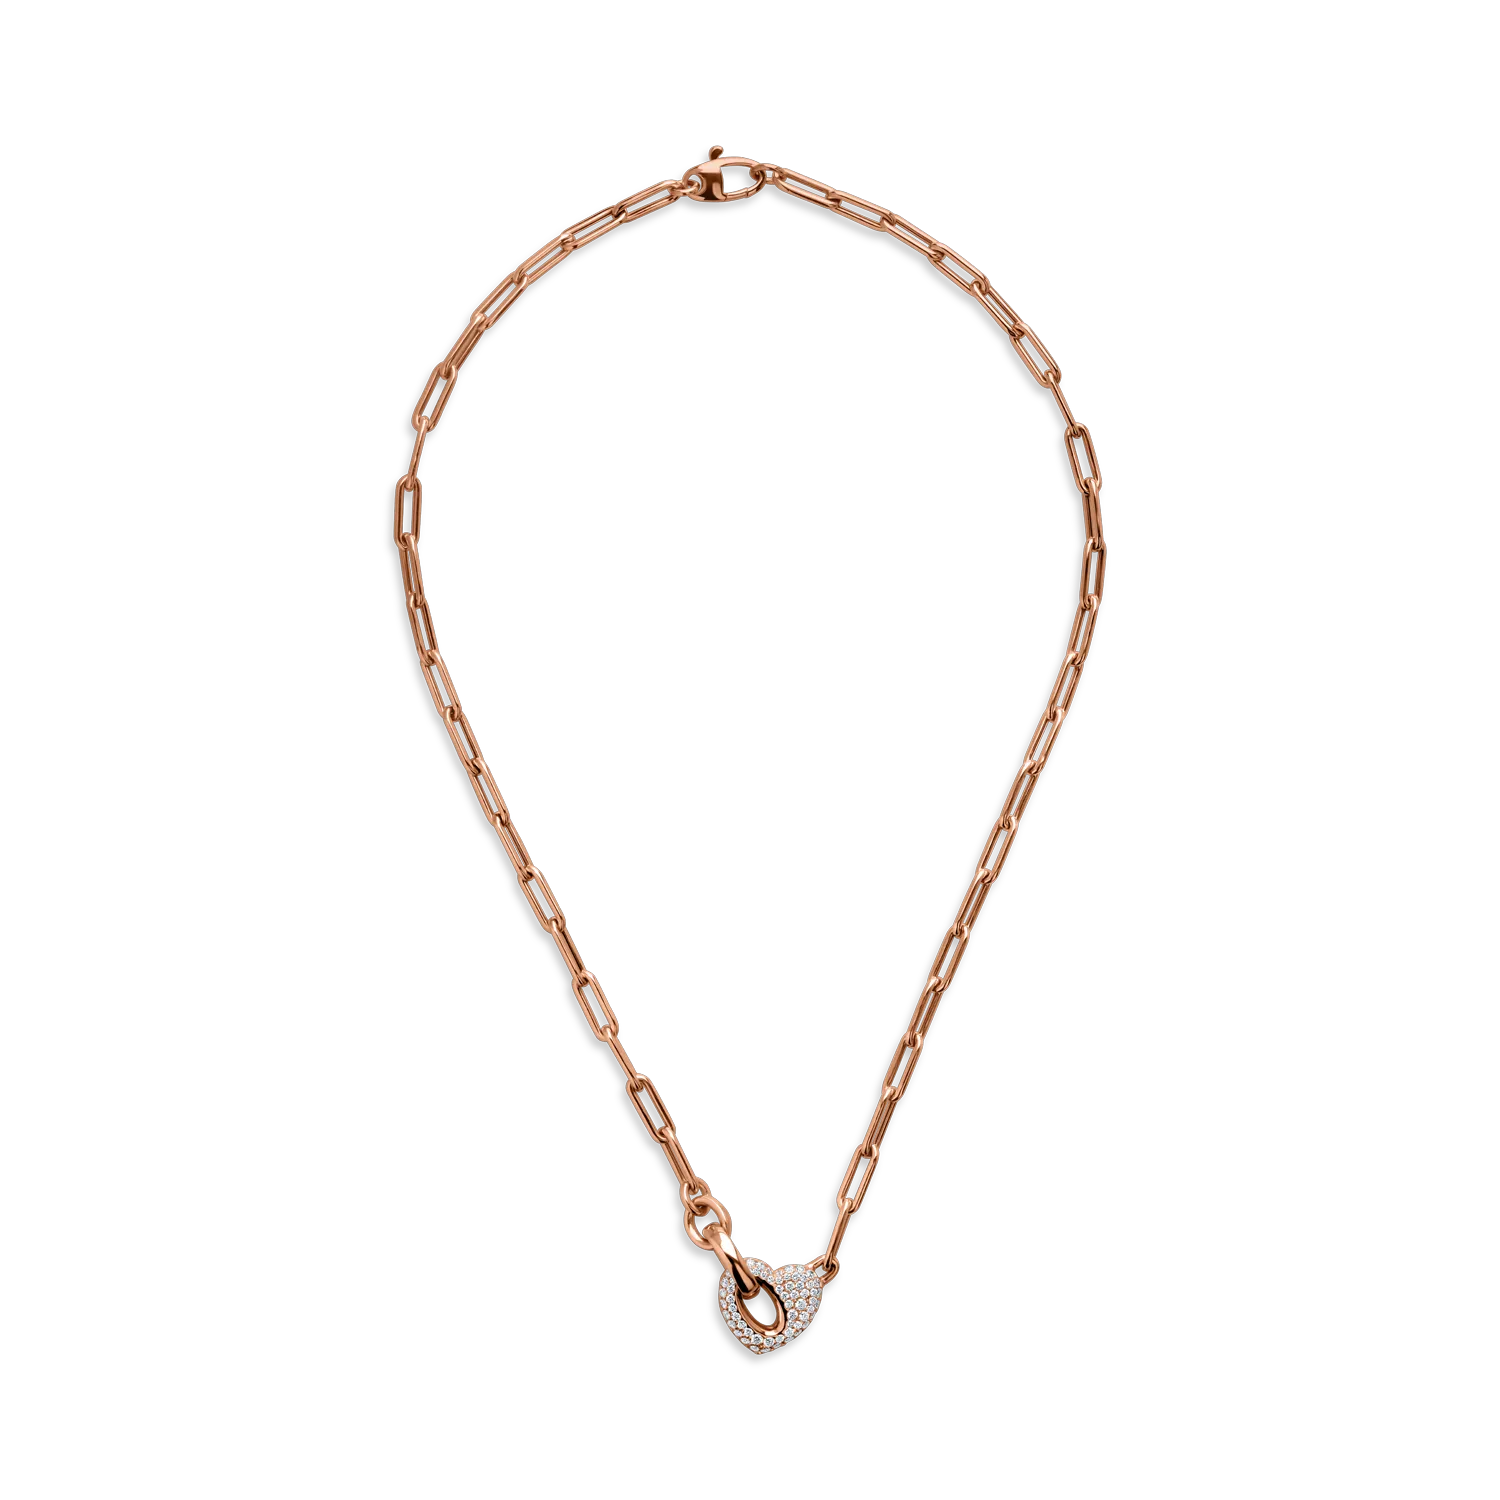 Rose gold heart pendant necklace with 0.85ct diamonds